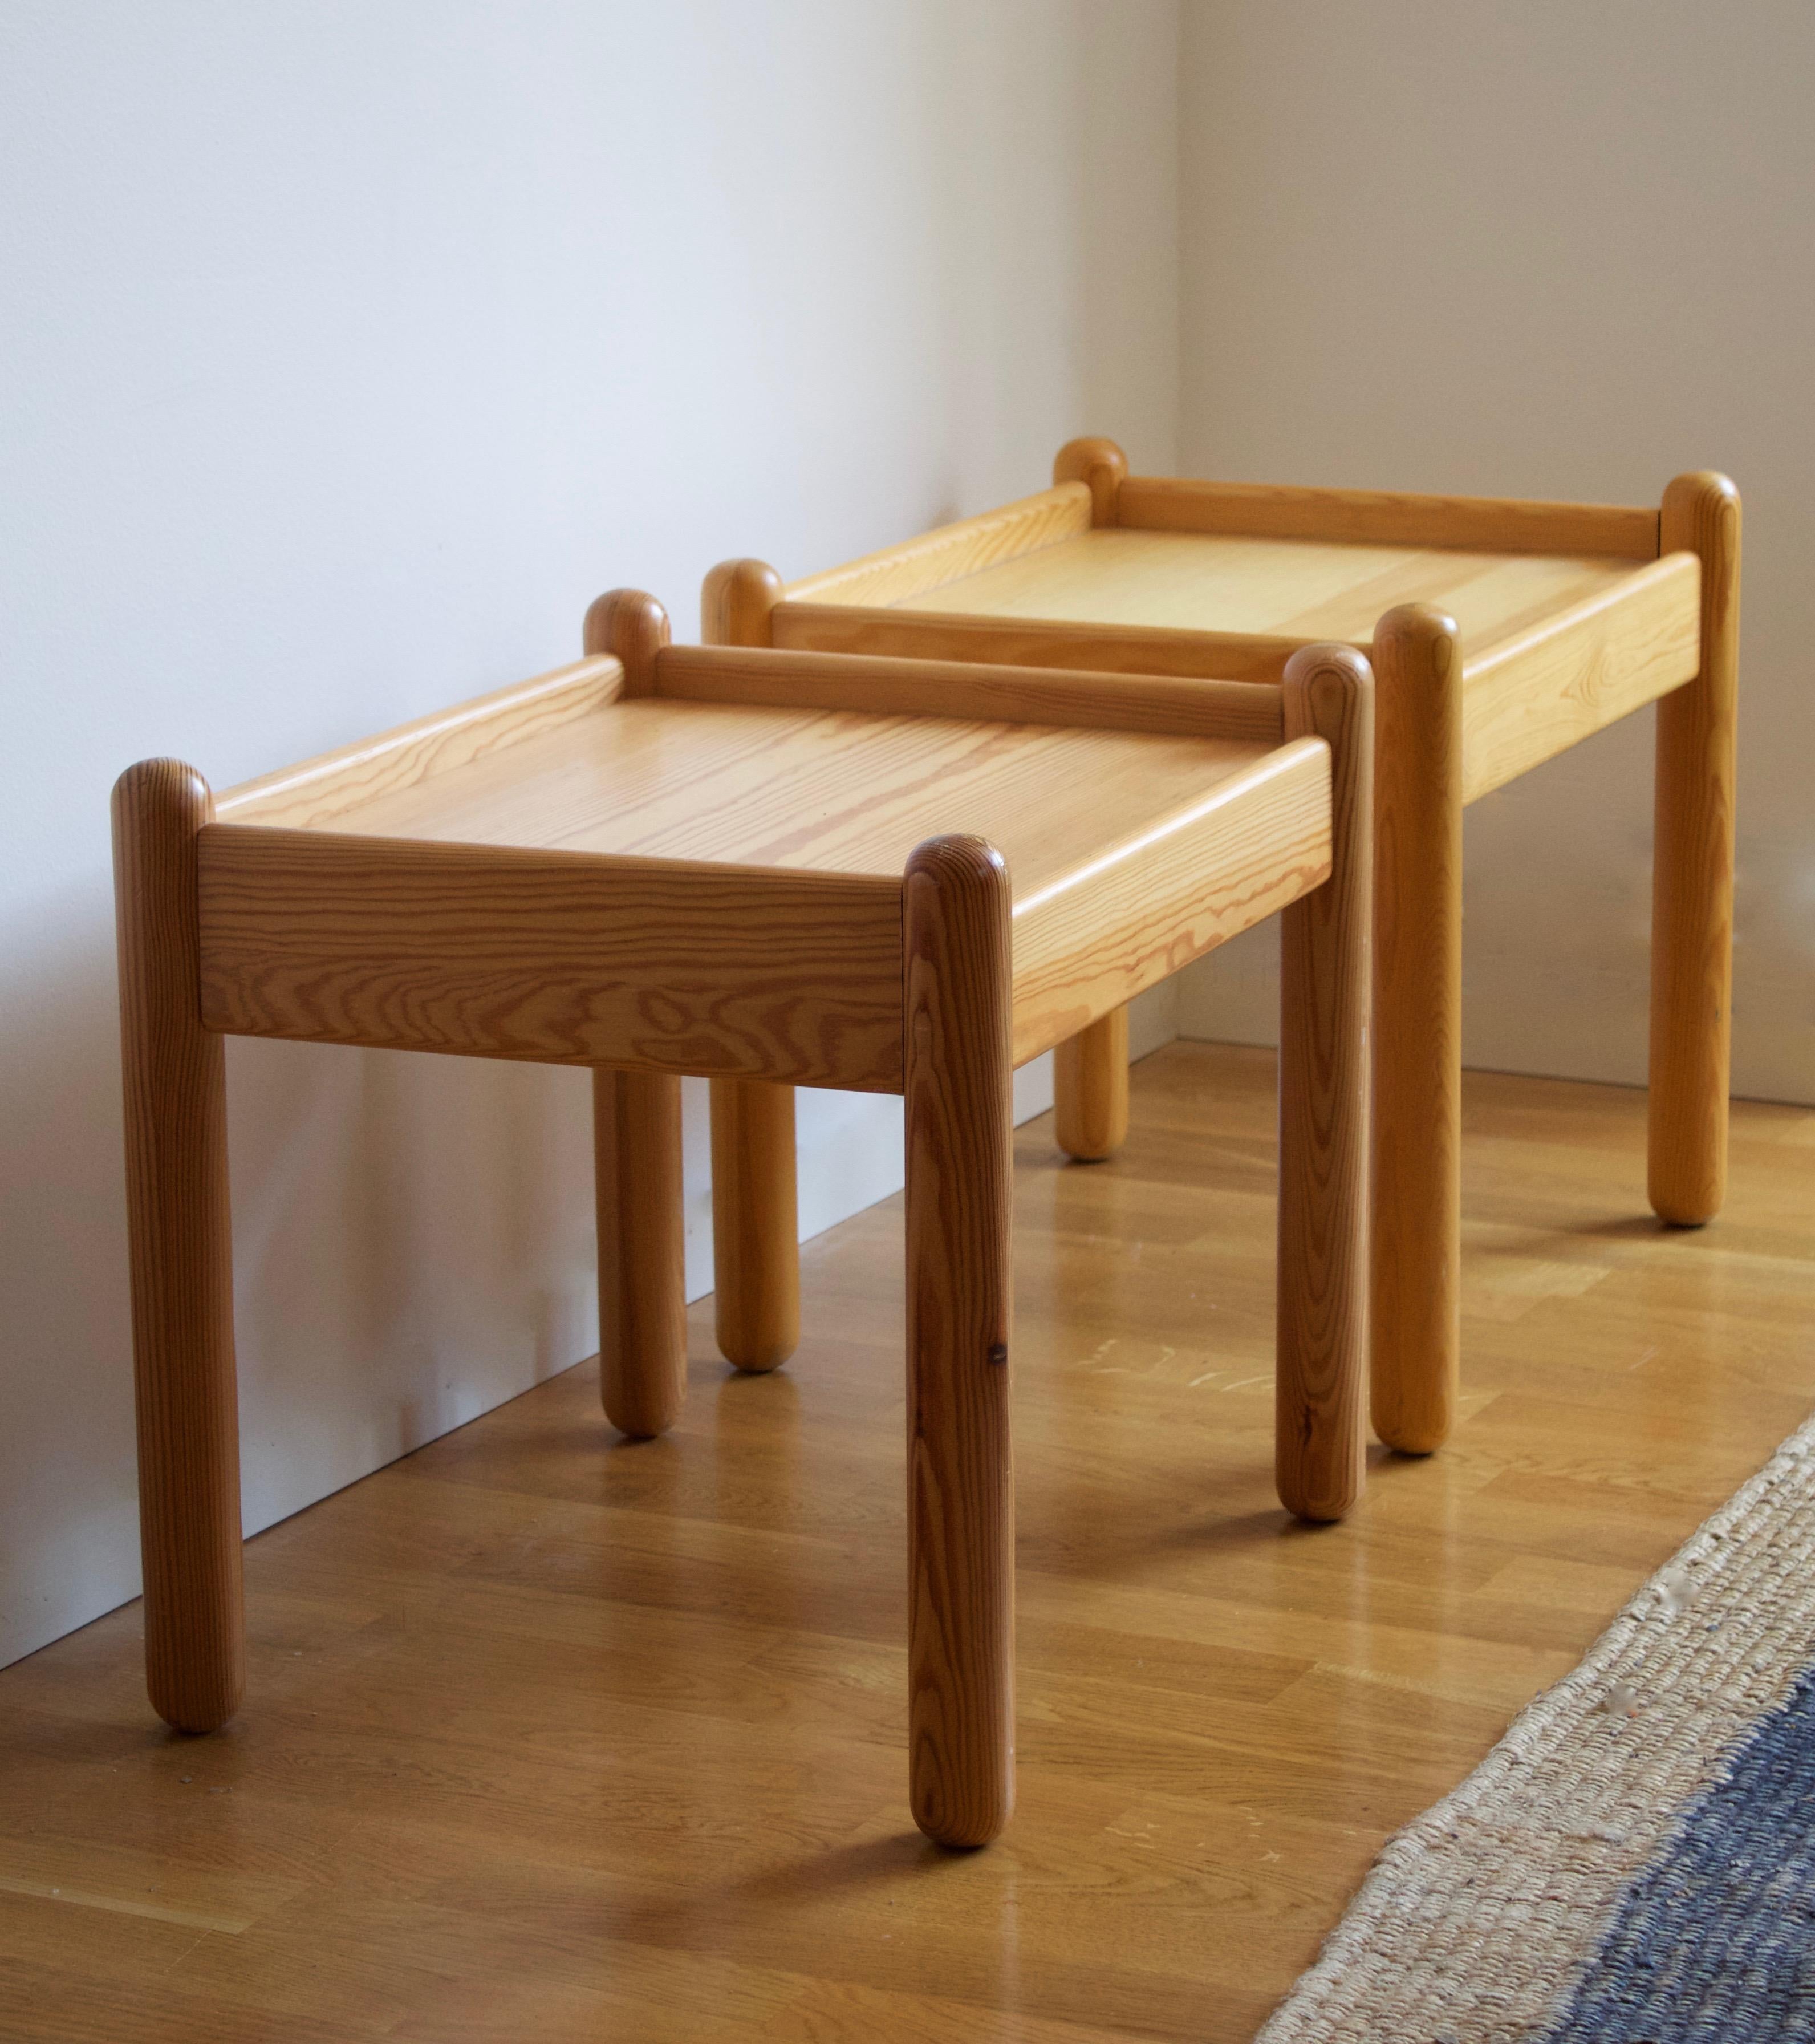 A set of side tables or bedside tables / nightstands. Designed and produced in Sweden, 1970s. In solid pine.

Other designers working in similar style and materials include Axel Einar Hjorth, Roland Wilhelmsson, Pierre Chapo, and Charlotte